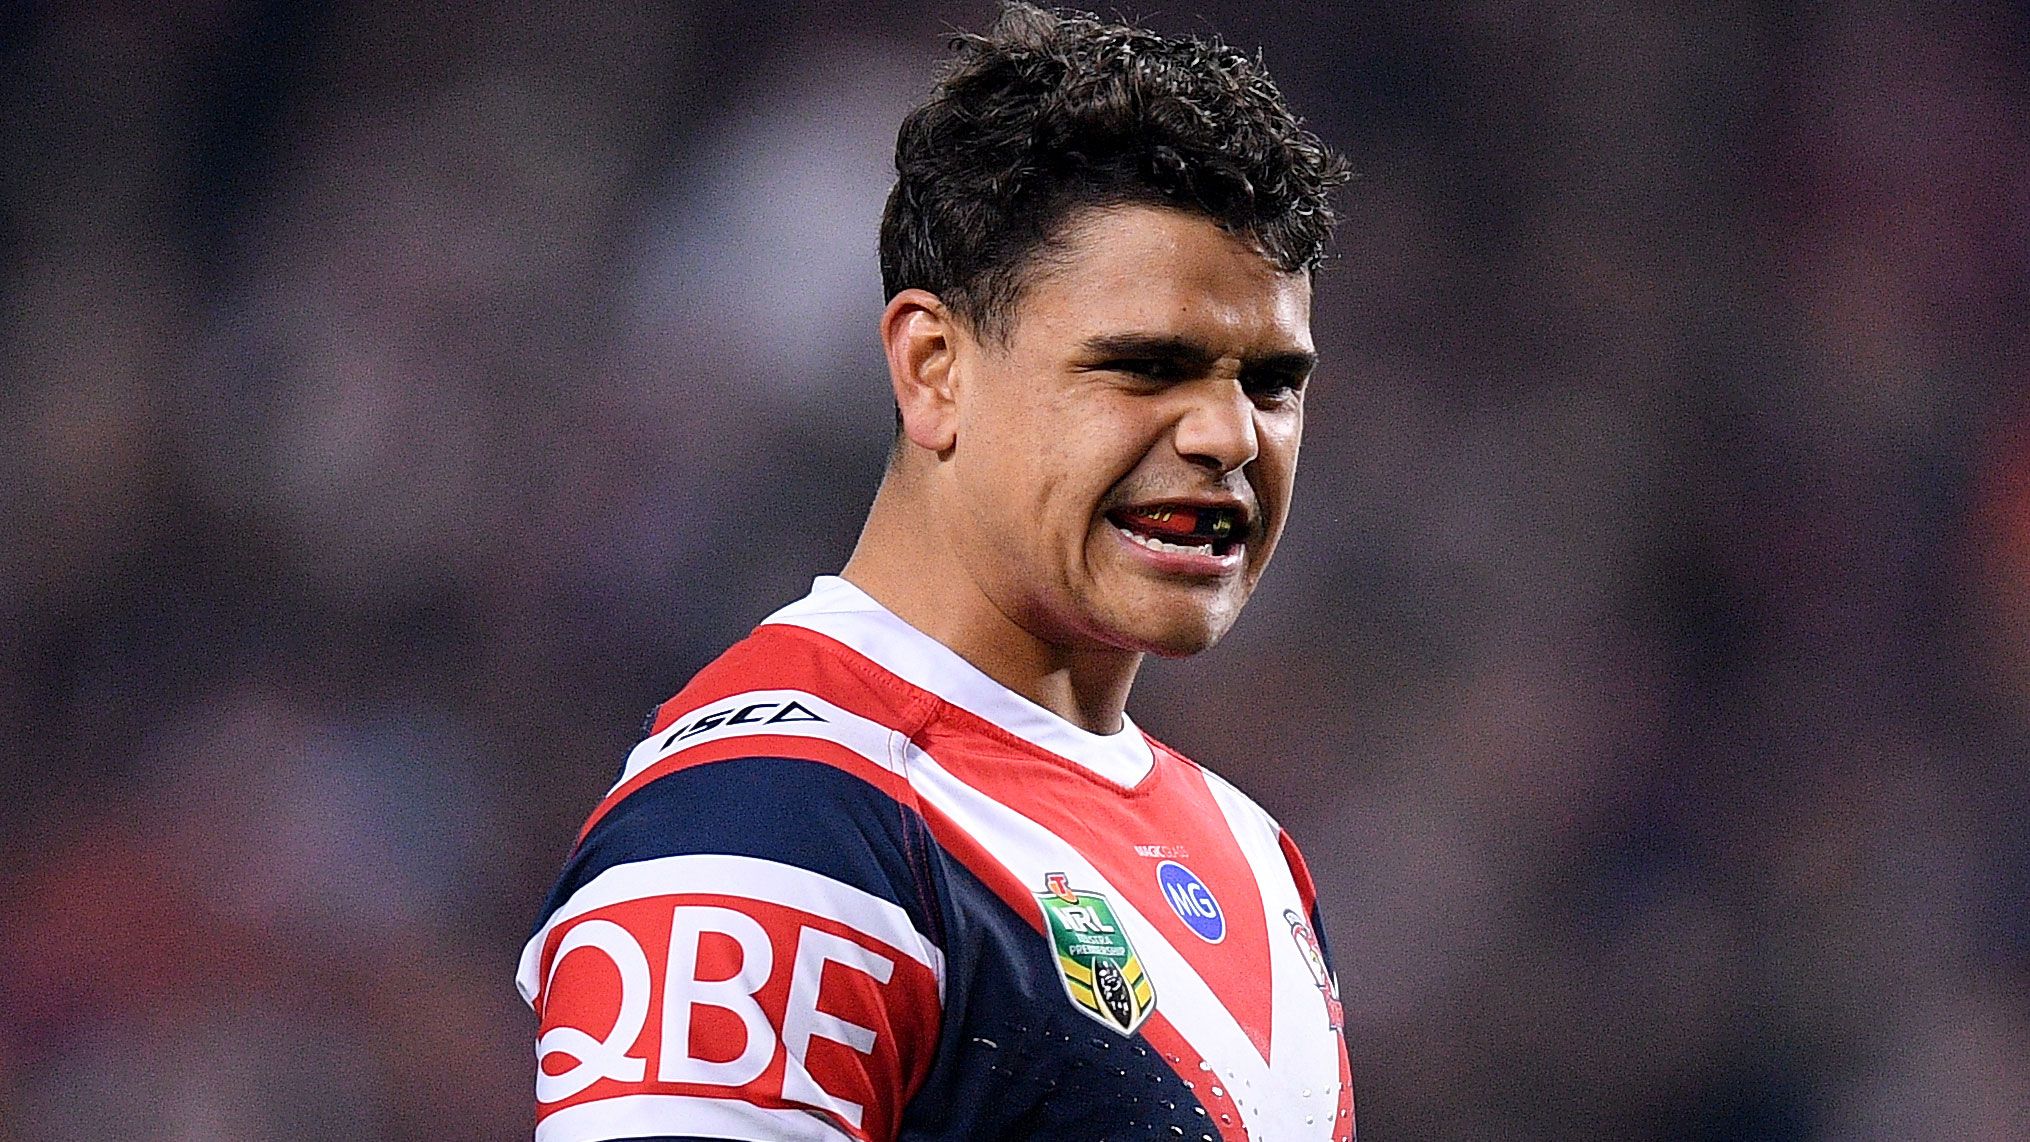 Laurie Daley warns Latrell Mitchell to rethink move away from Roosters